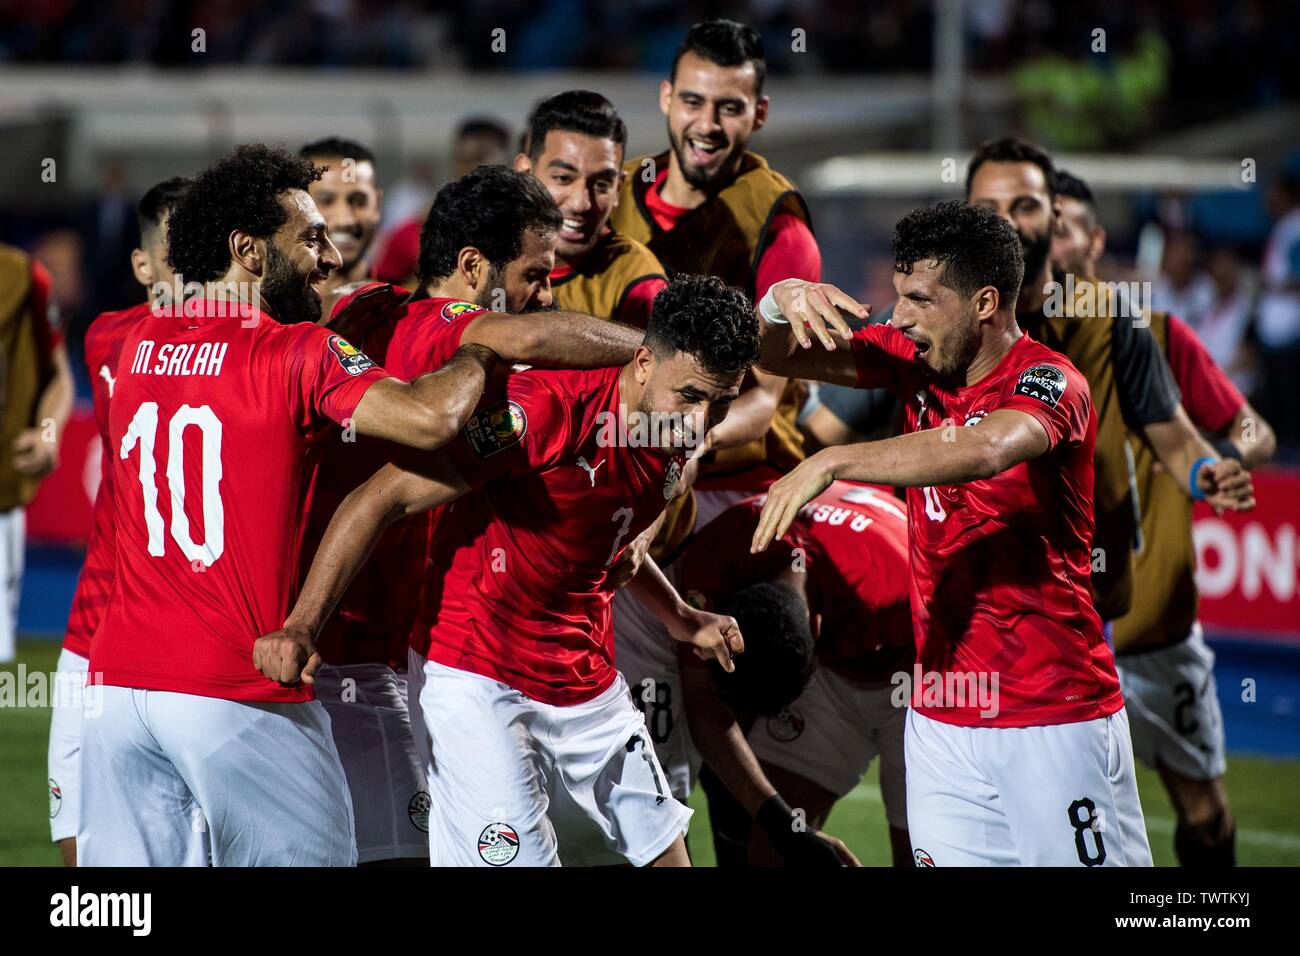 CAIRO, EGYPT - JUNE 21: Mahmoud Hassan Trezeguet of Egypt celebrate with his team mates Ayman Ashraf Elsayed, Mohamed Elneny, Marwan Mohsen Fahmy Tarwat, Mohamed Salah and Abdallah Bekhit after scoring goal during the 2019 Africa Cup of Nations Group A match between Egypt and Zimbabwe at Cairo International Stadium on June 21, 201) Stock Photo